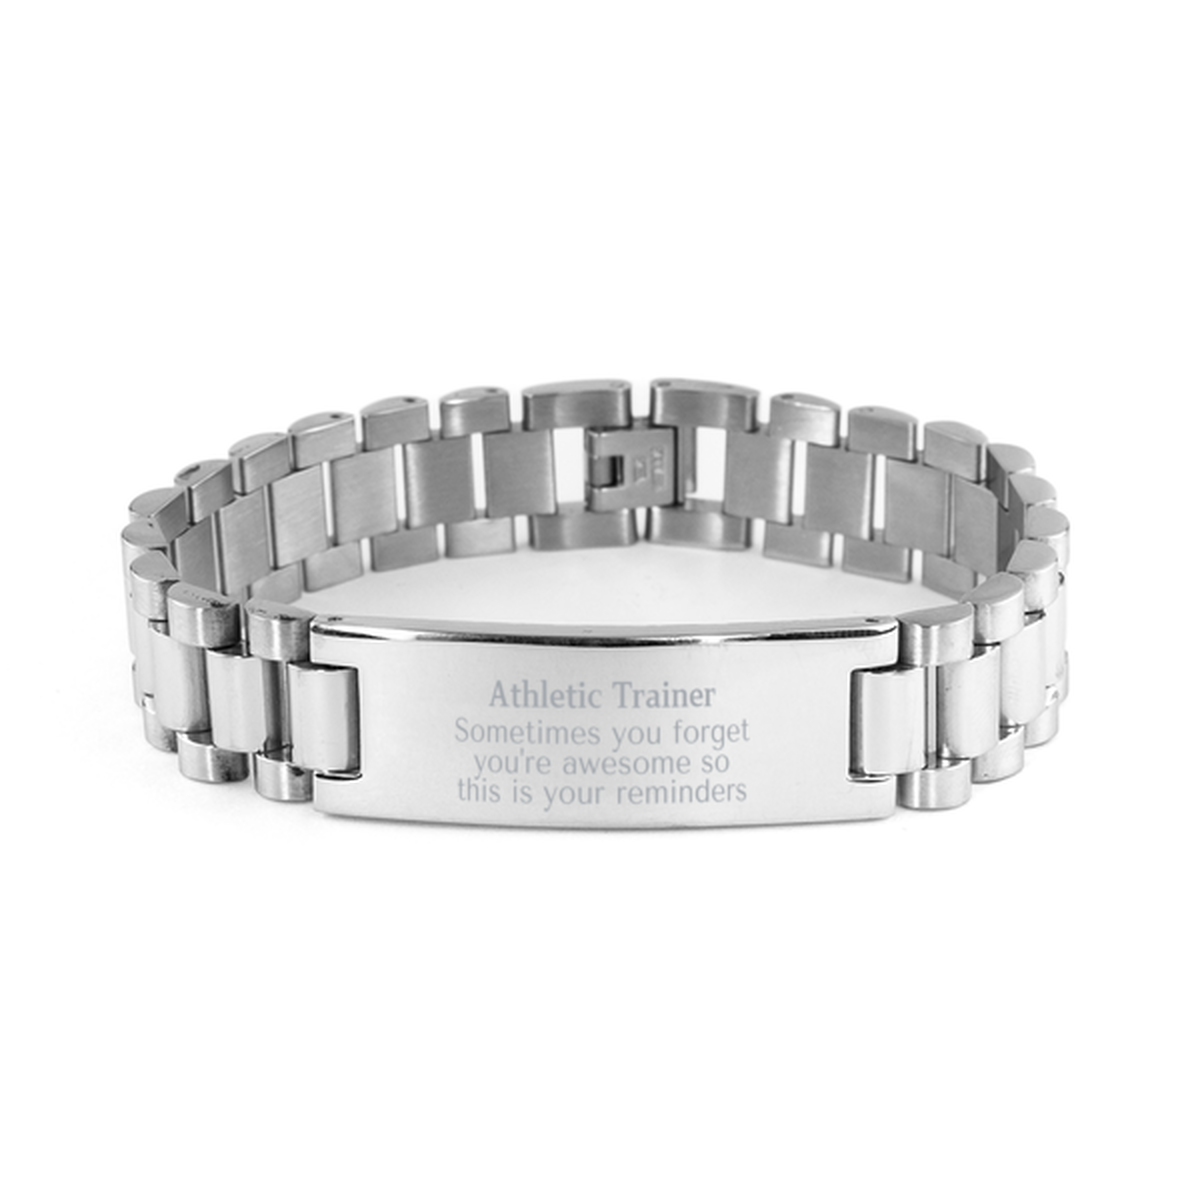 Sentimental Athletic Trainer Ladder Stainless Steel Bracelet, Athletic Trainer Sometimes you forget you're awesome so this is your reminders, Graduation Christmas Birthday Gifts for Athletic Trainer, Men, Women, Coworkers